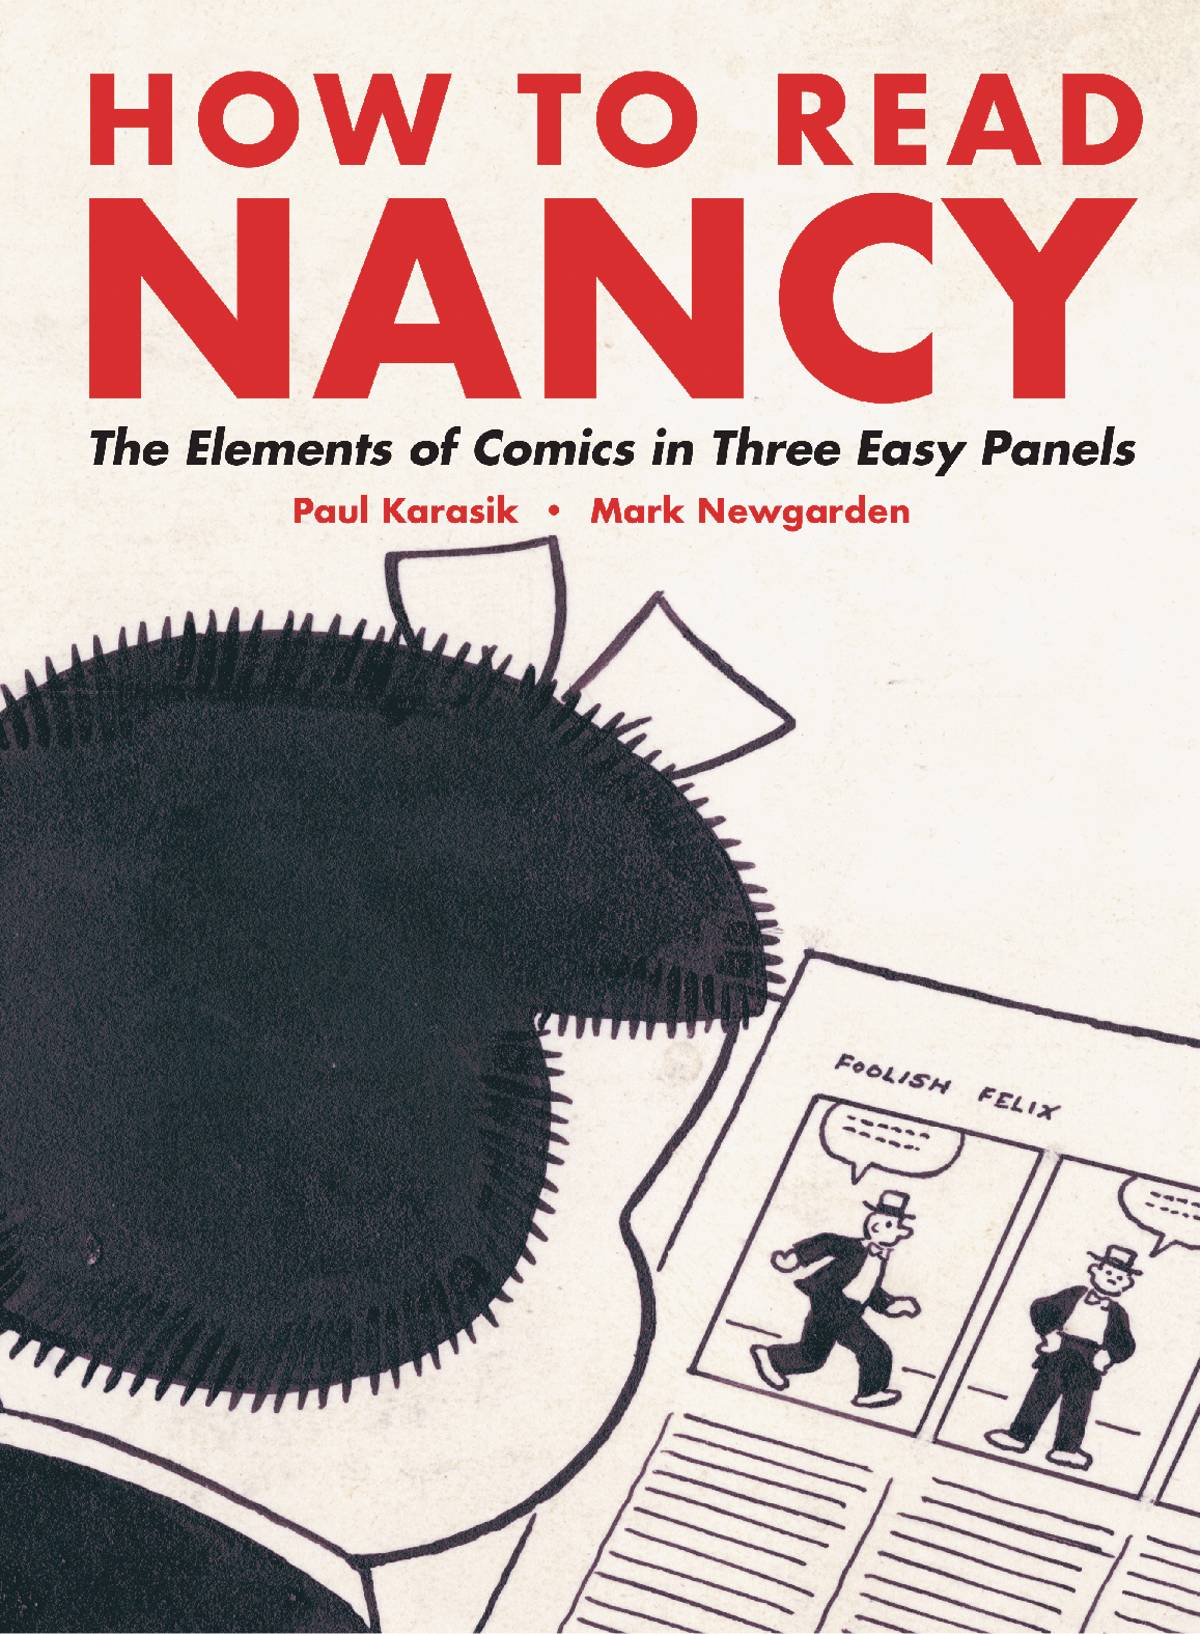 HOW TO READ NANCY THE ELEMENTS OF COMICS IN THREE EASY PANELS SC